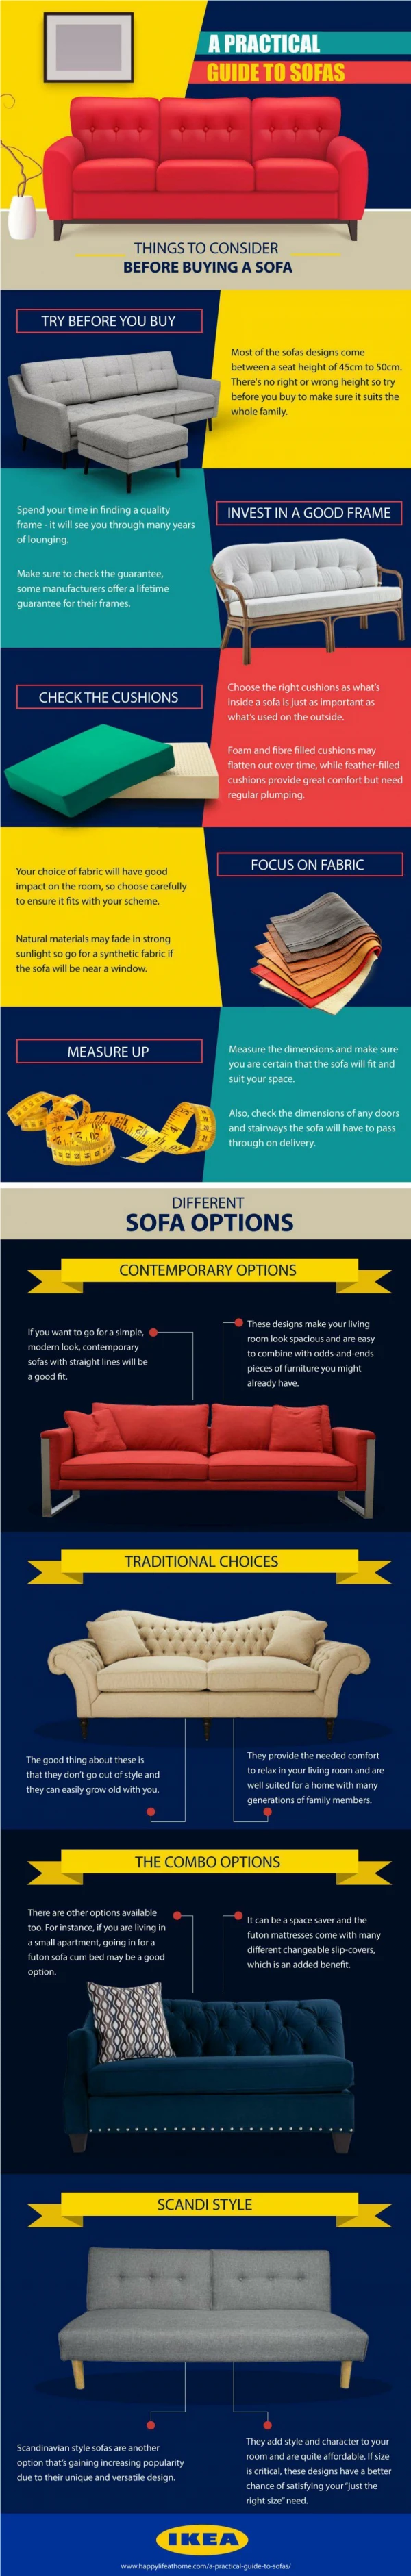 A Practical Guide to Sofas - Ikea UAE